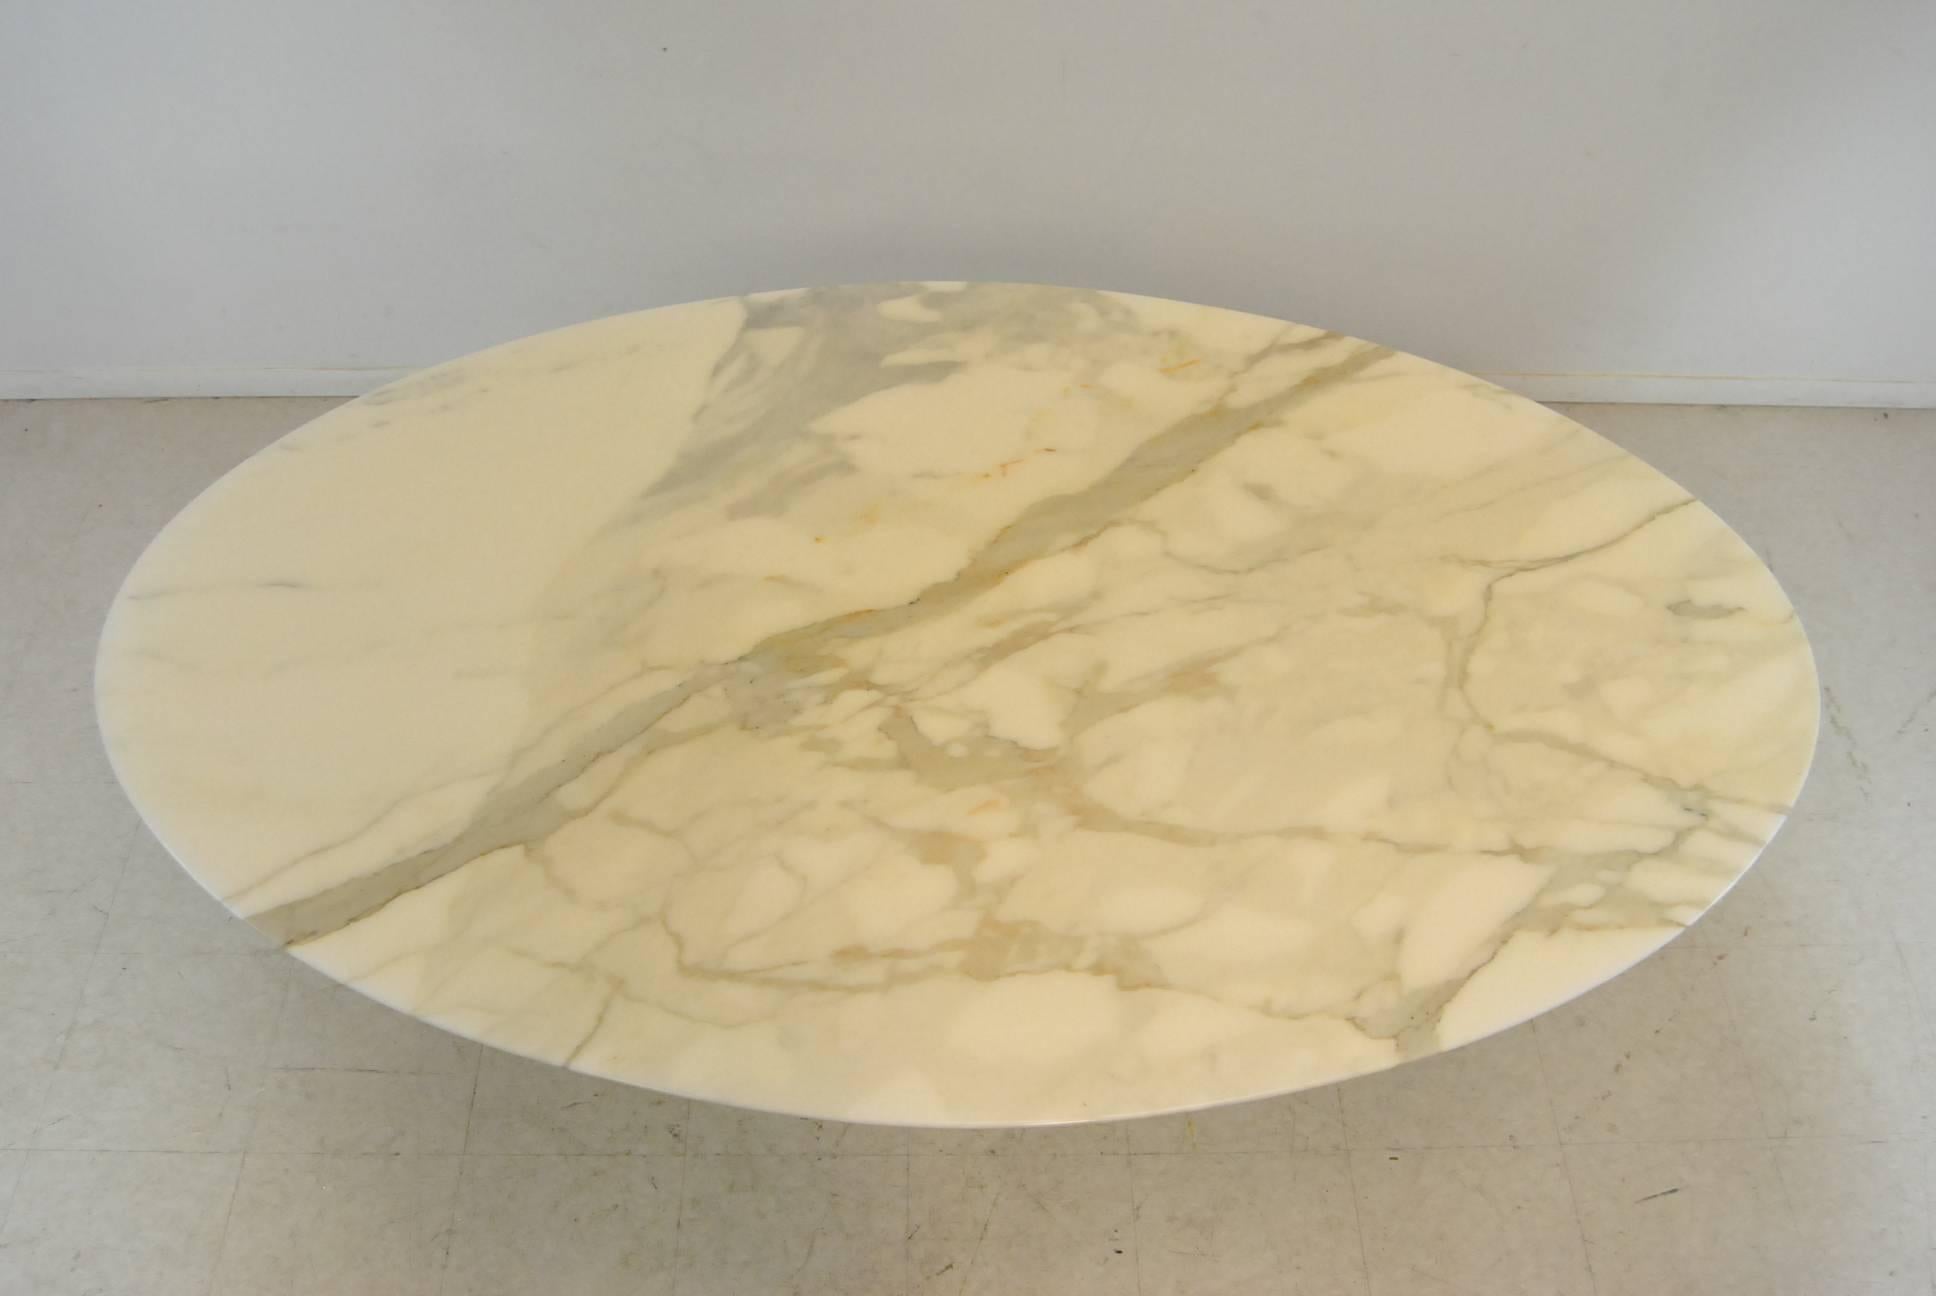 A fantastic marble top tulip dining table by Eero Saarinen for Knoll. The base is constructed from molded heavy cast aluminium that has been polish and coated in a tough abrasion resistant rilsan finish. The engineered vetro bianco top is offered in